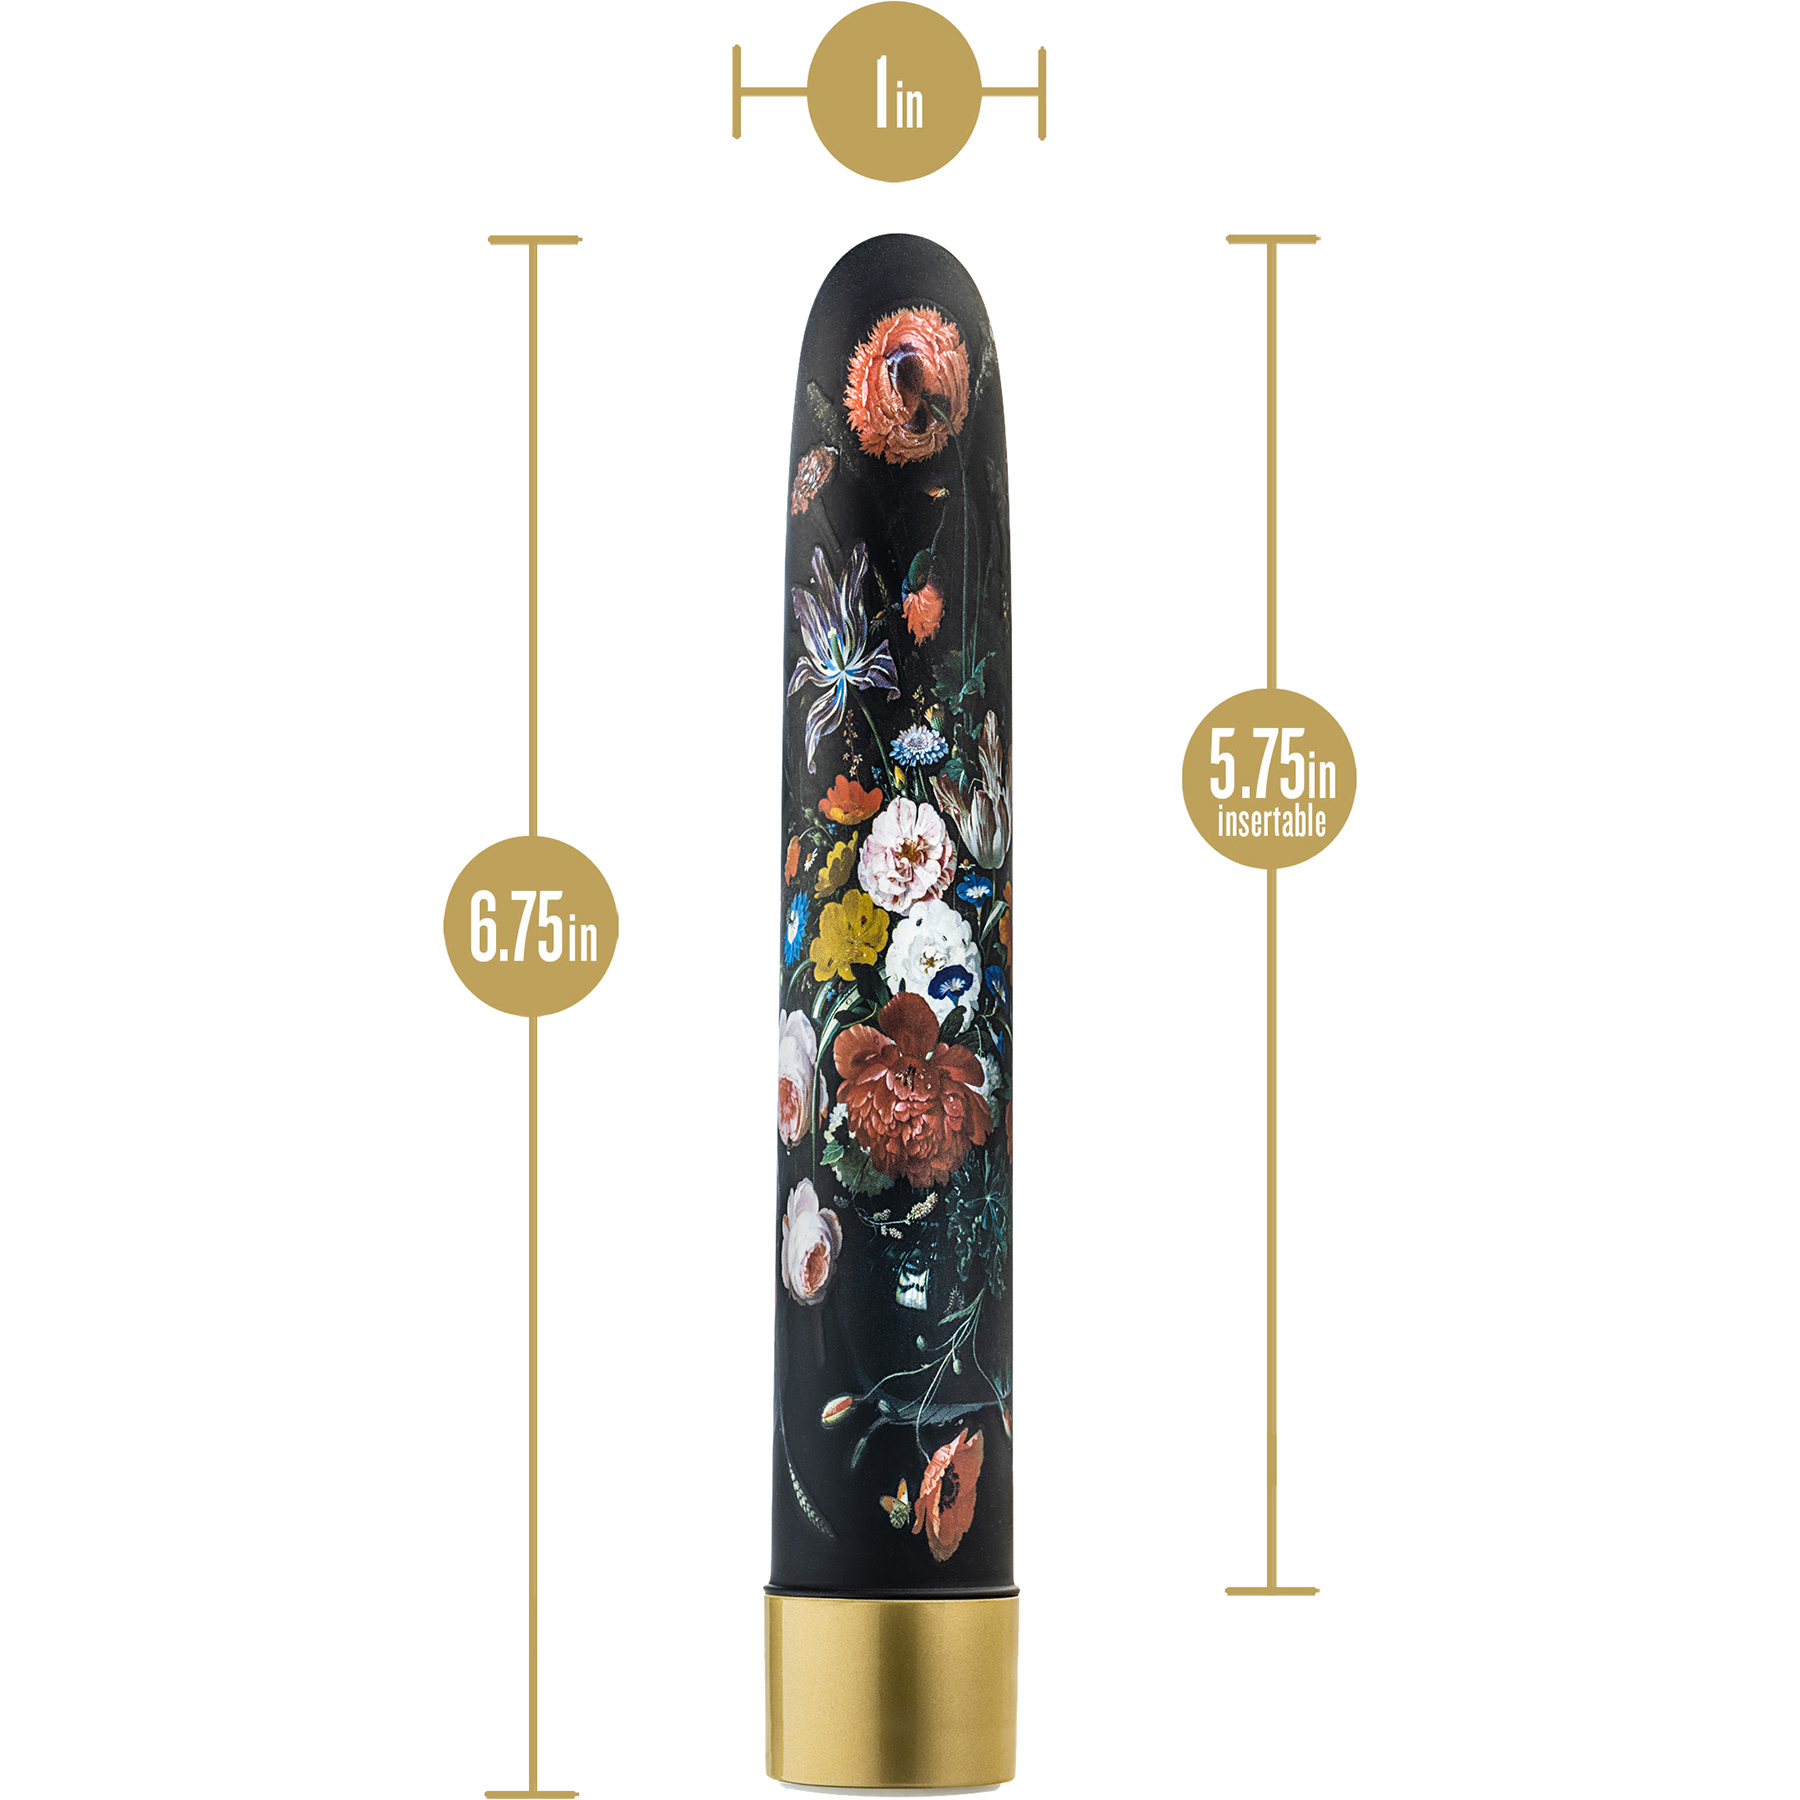 The Collection Bountiful Limited Edition Rechargeable Waterproof Slimline Vibrator - Measurements